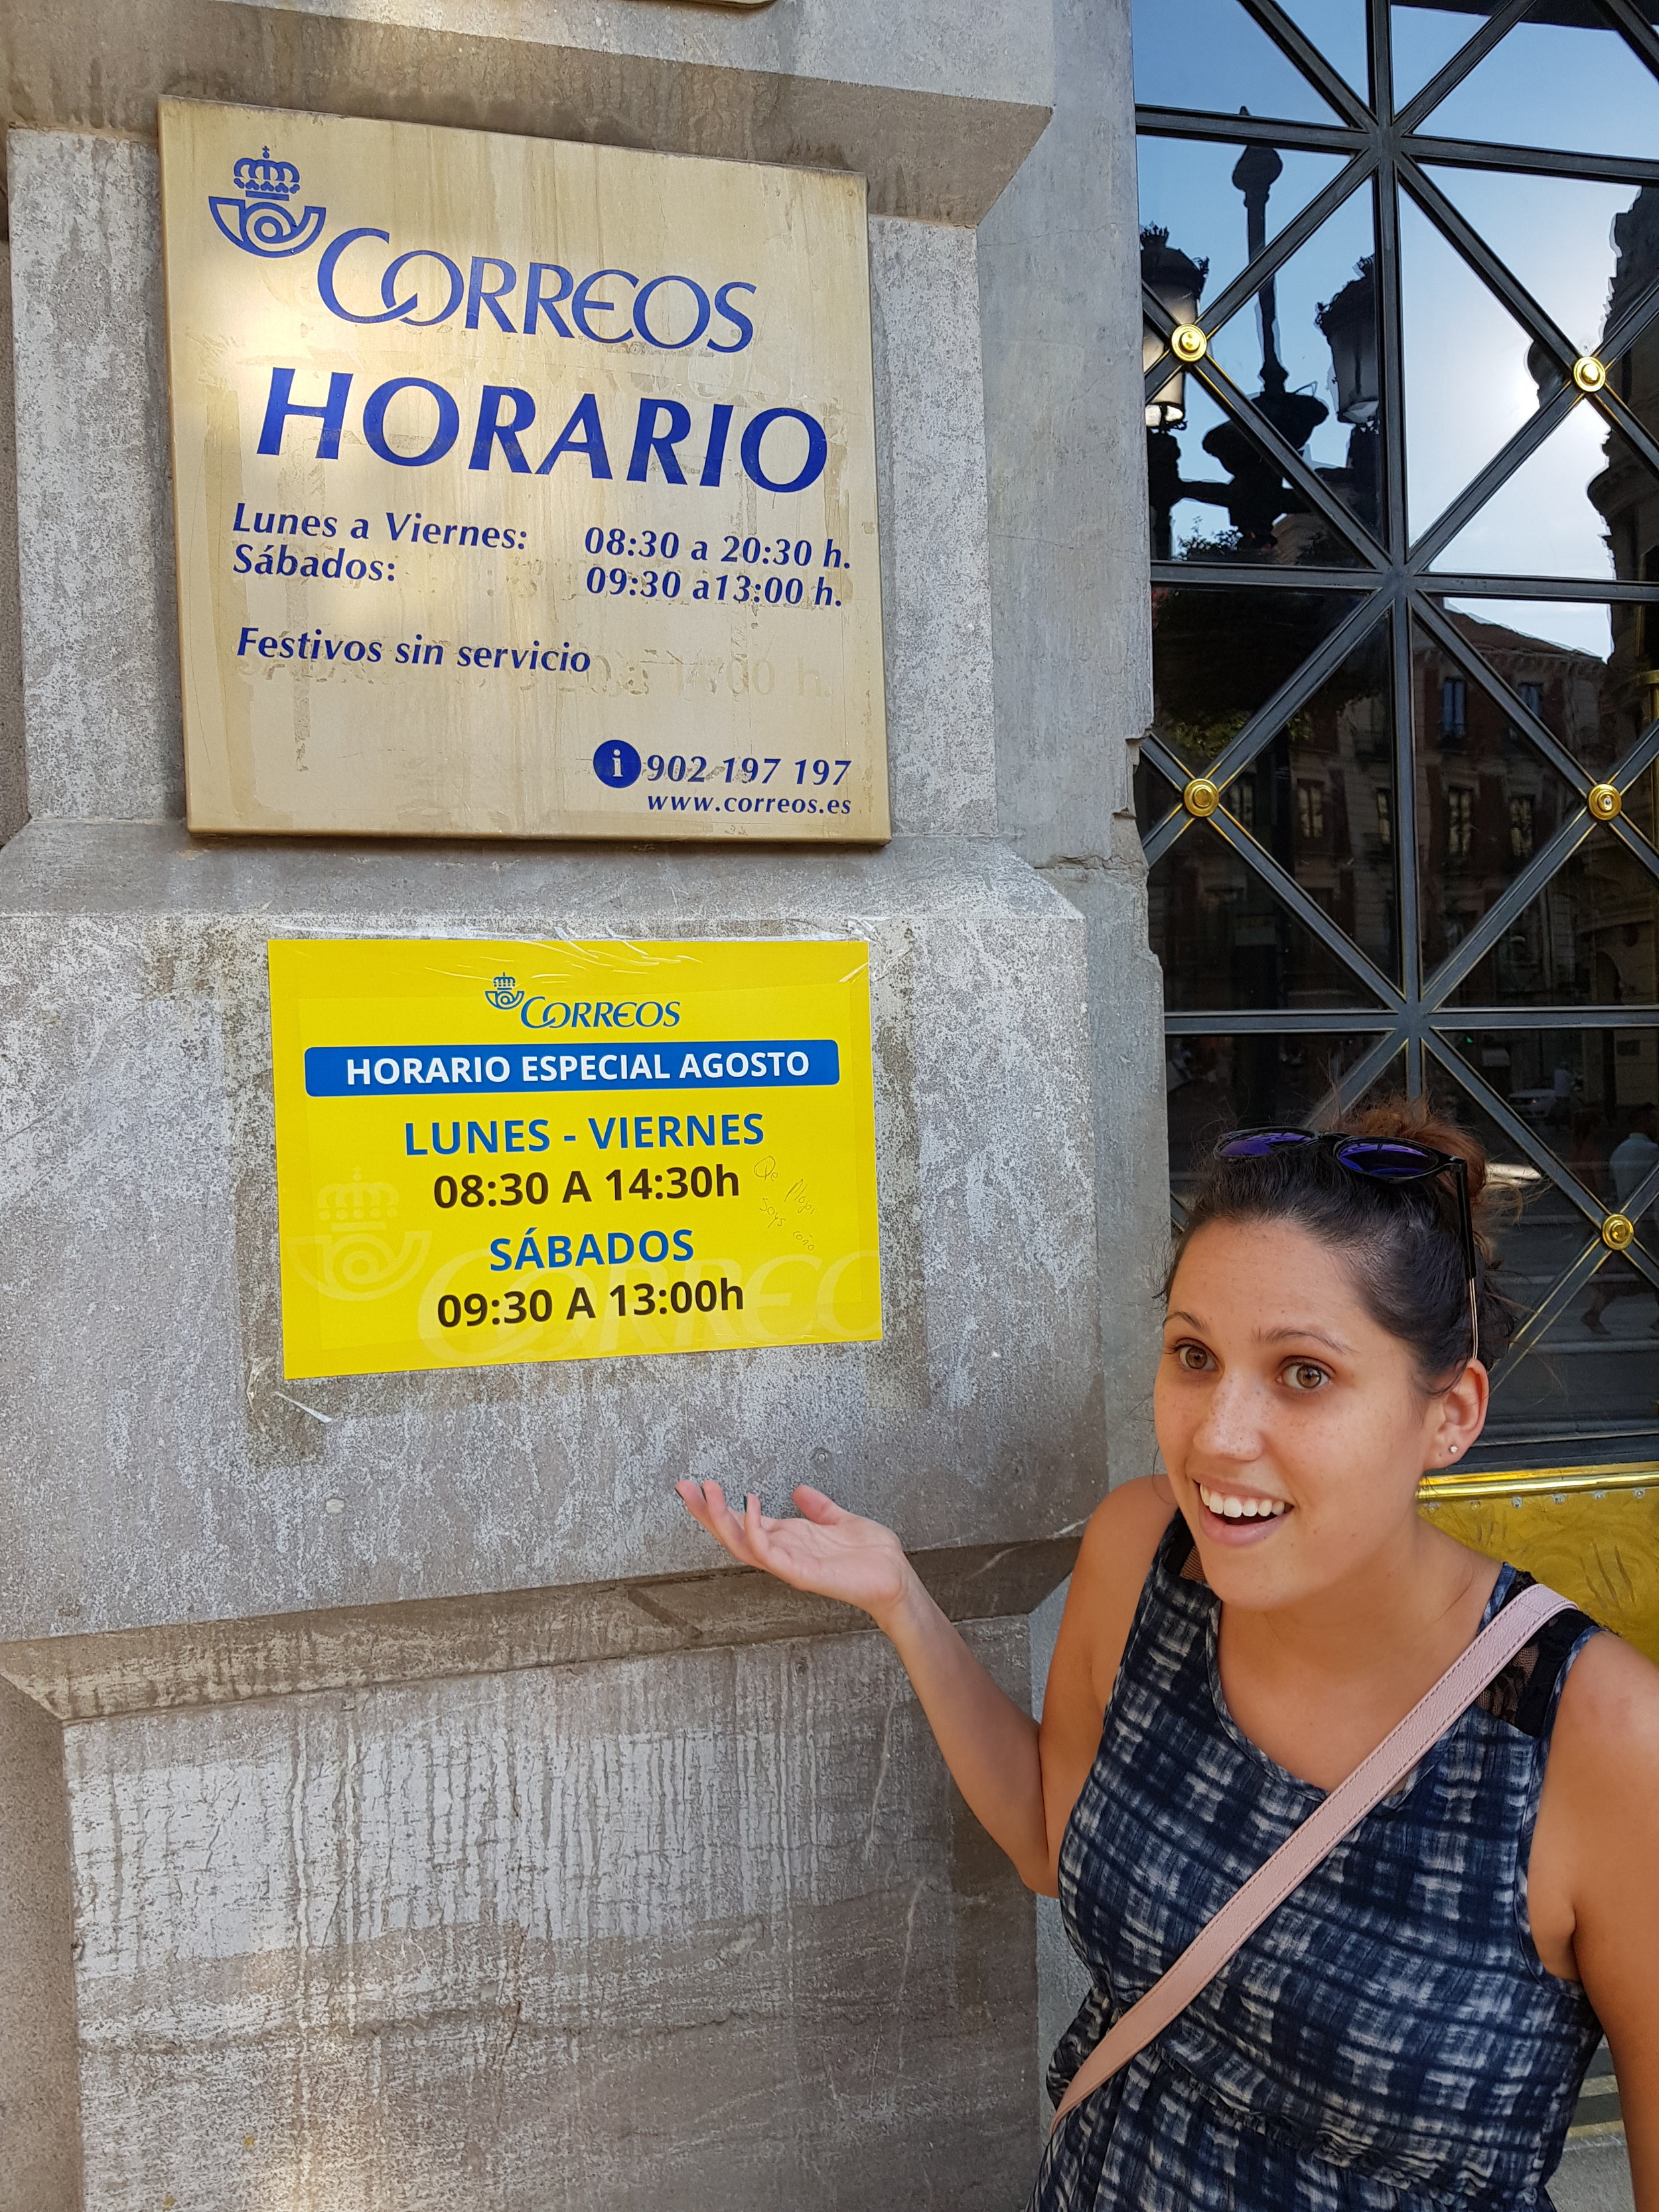 As with most offices in Spain, be sure to check the timetable before you head out to correos, especially in the summer!